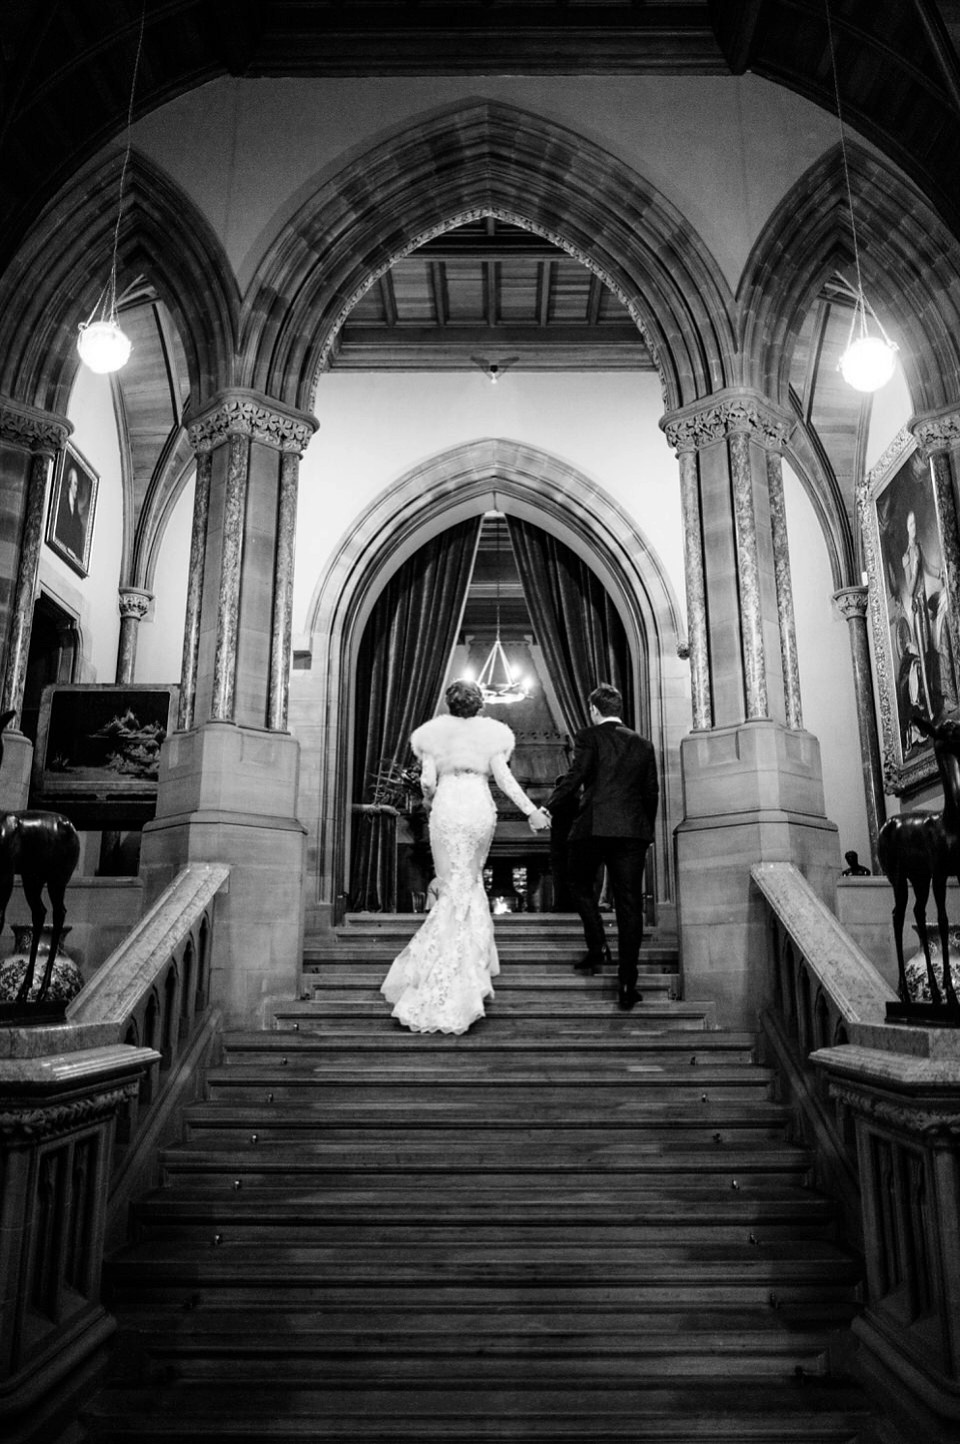 Mount Stuart Isle of Bute, Wedding in Scotland, YolanCri wedding dress, Hollywood glamour inspired bride, bride in red lipstick, burgundy bridesmaids dresses, Humanist wedding // All images by Lisa Devine Photography.